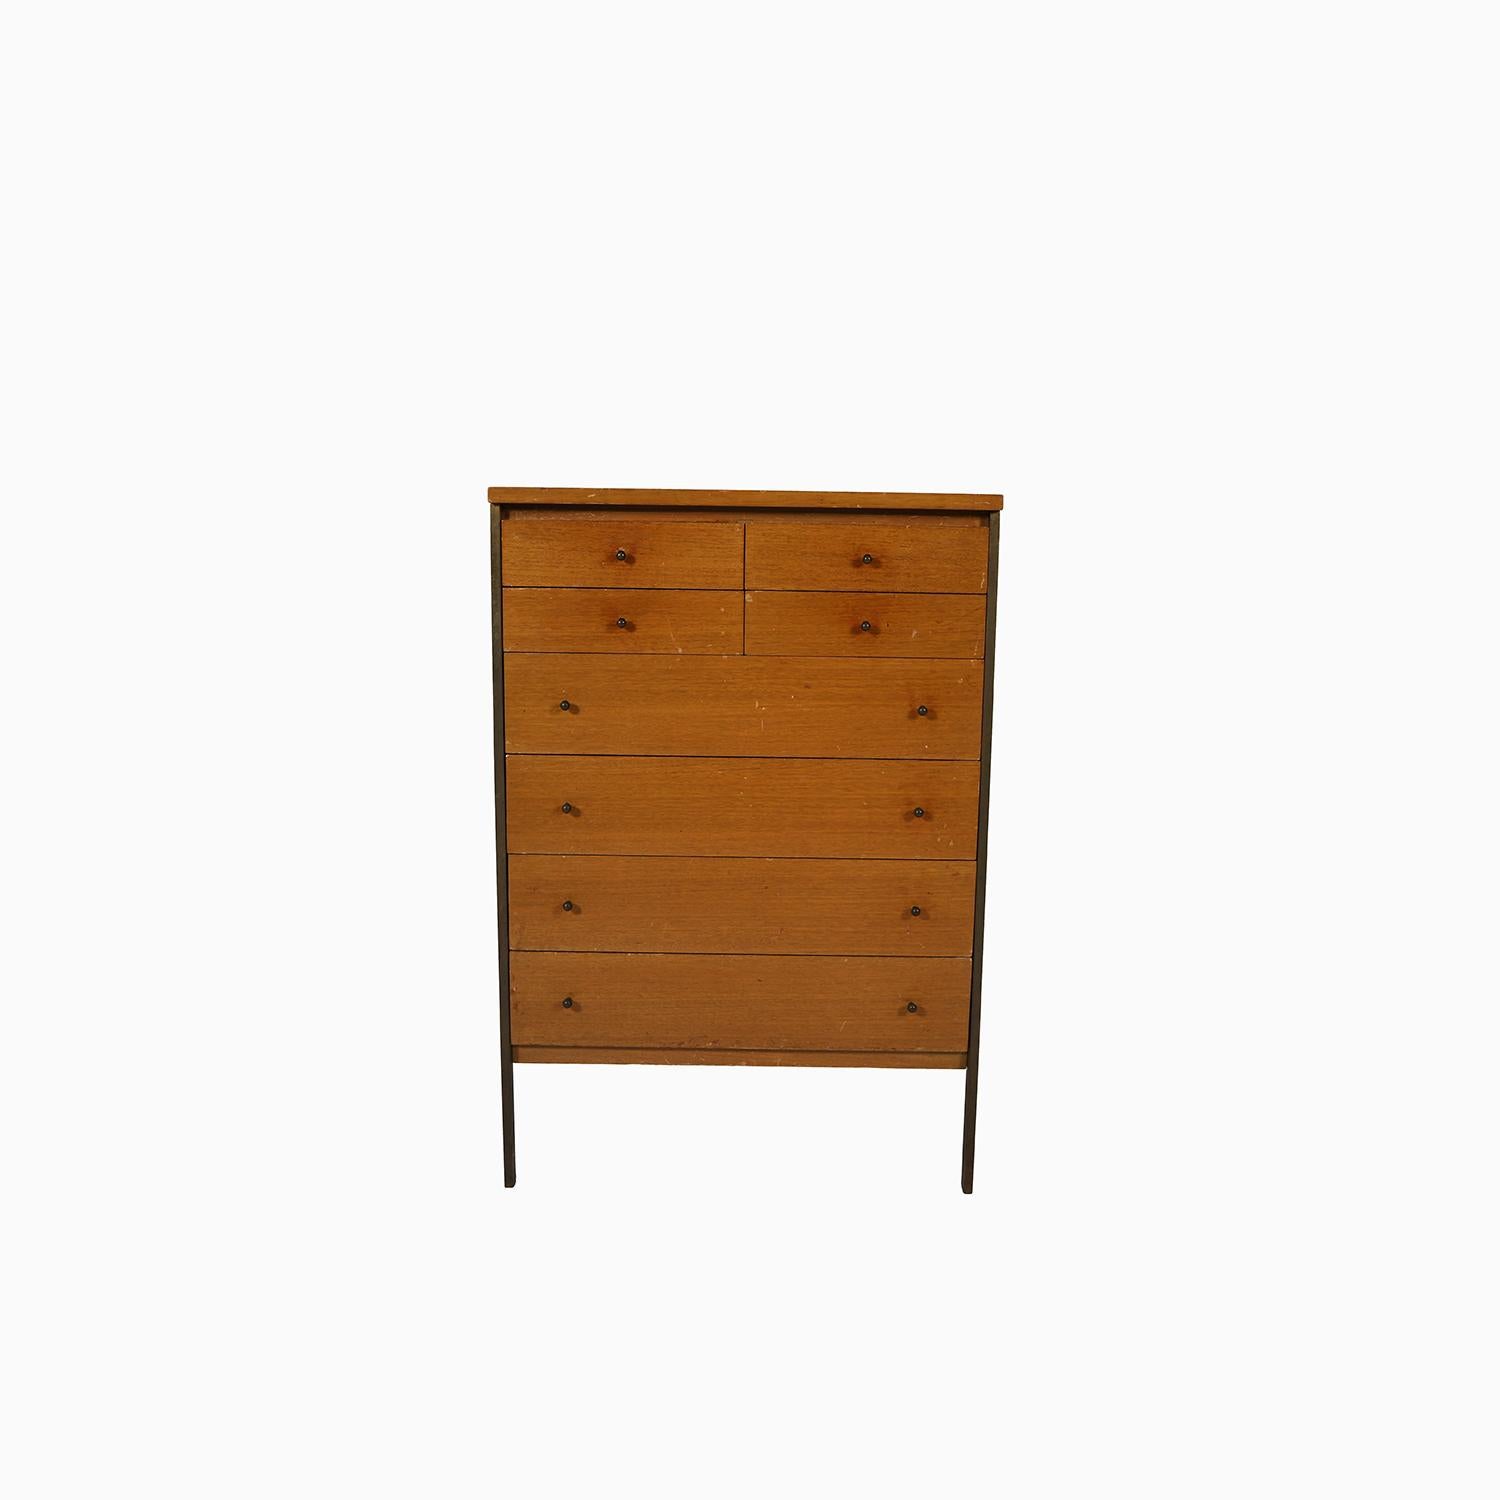 A rare design by American mid century designer Paul McCobb for H. Sacks & Sons. Mahogany cabinet with solid brass legs and perfectly proportioned brass drawer pulls. An excellent entry piece or use in the bedroom for jewelry. 

Professional, skilled